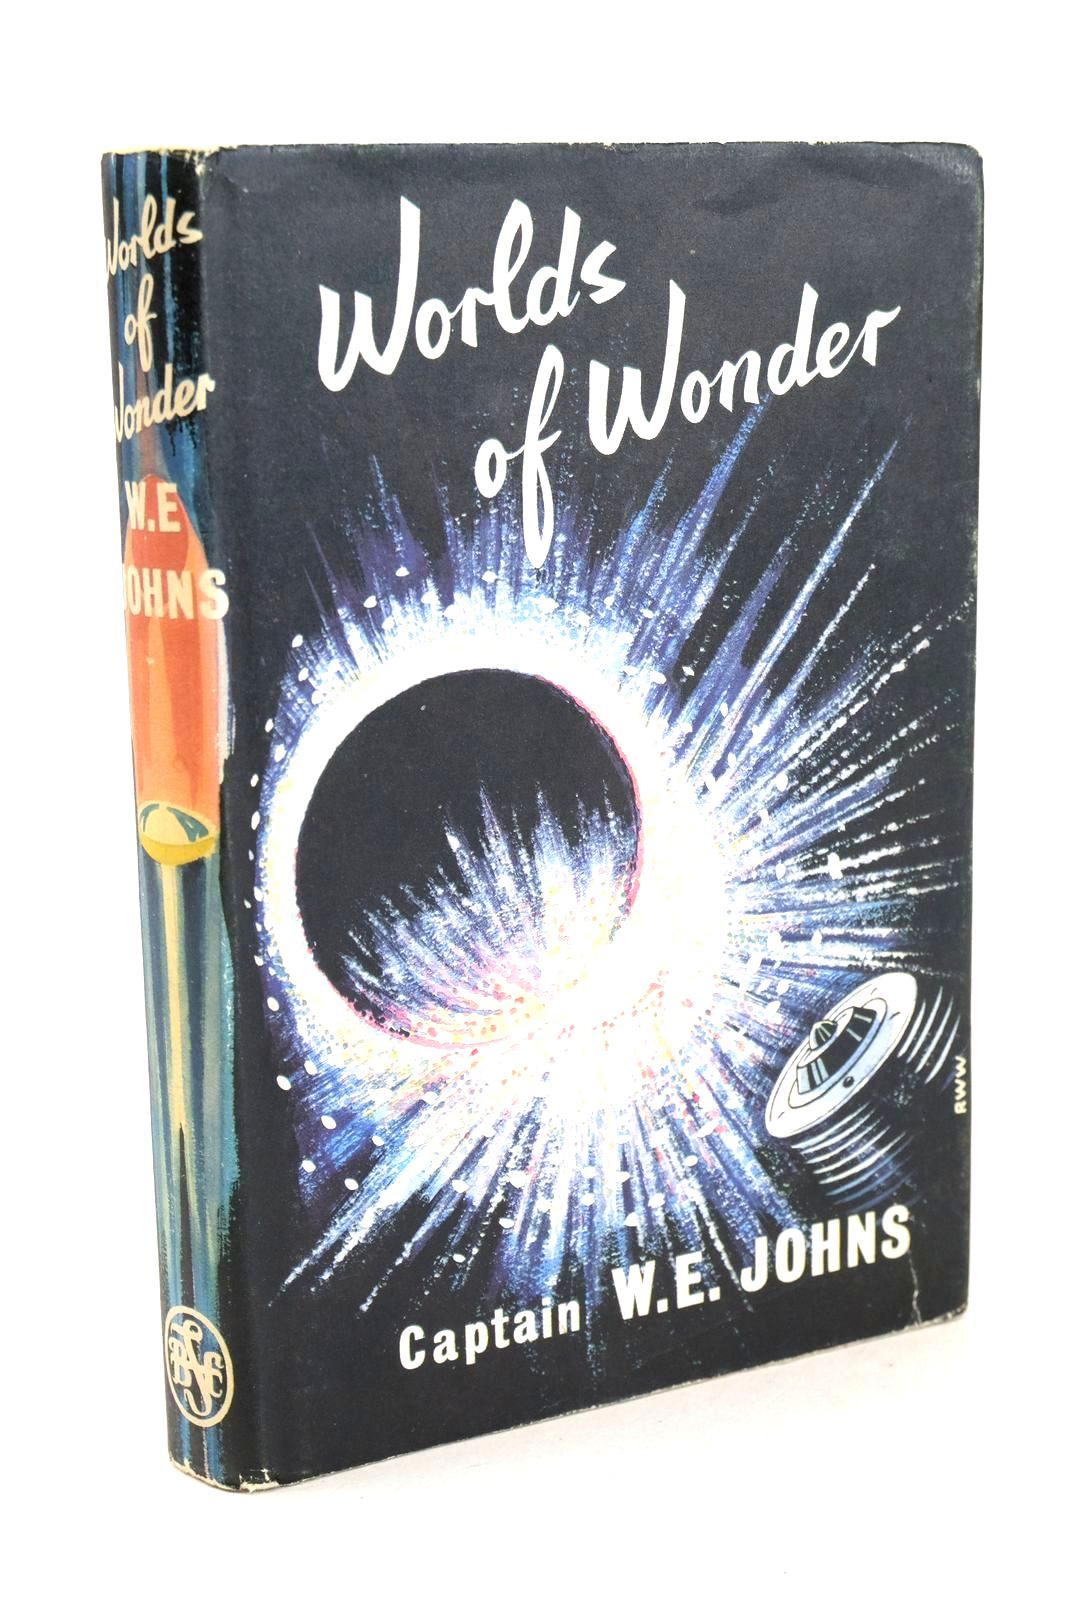 Photo of WORLDS OF WONDER- Stock Number: 1326027